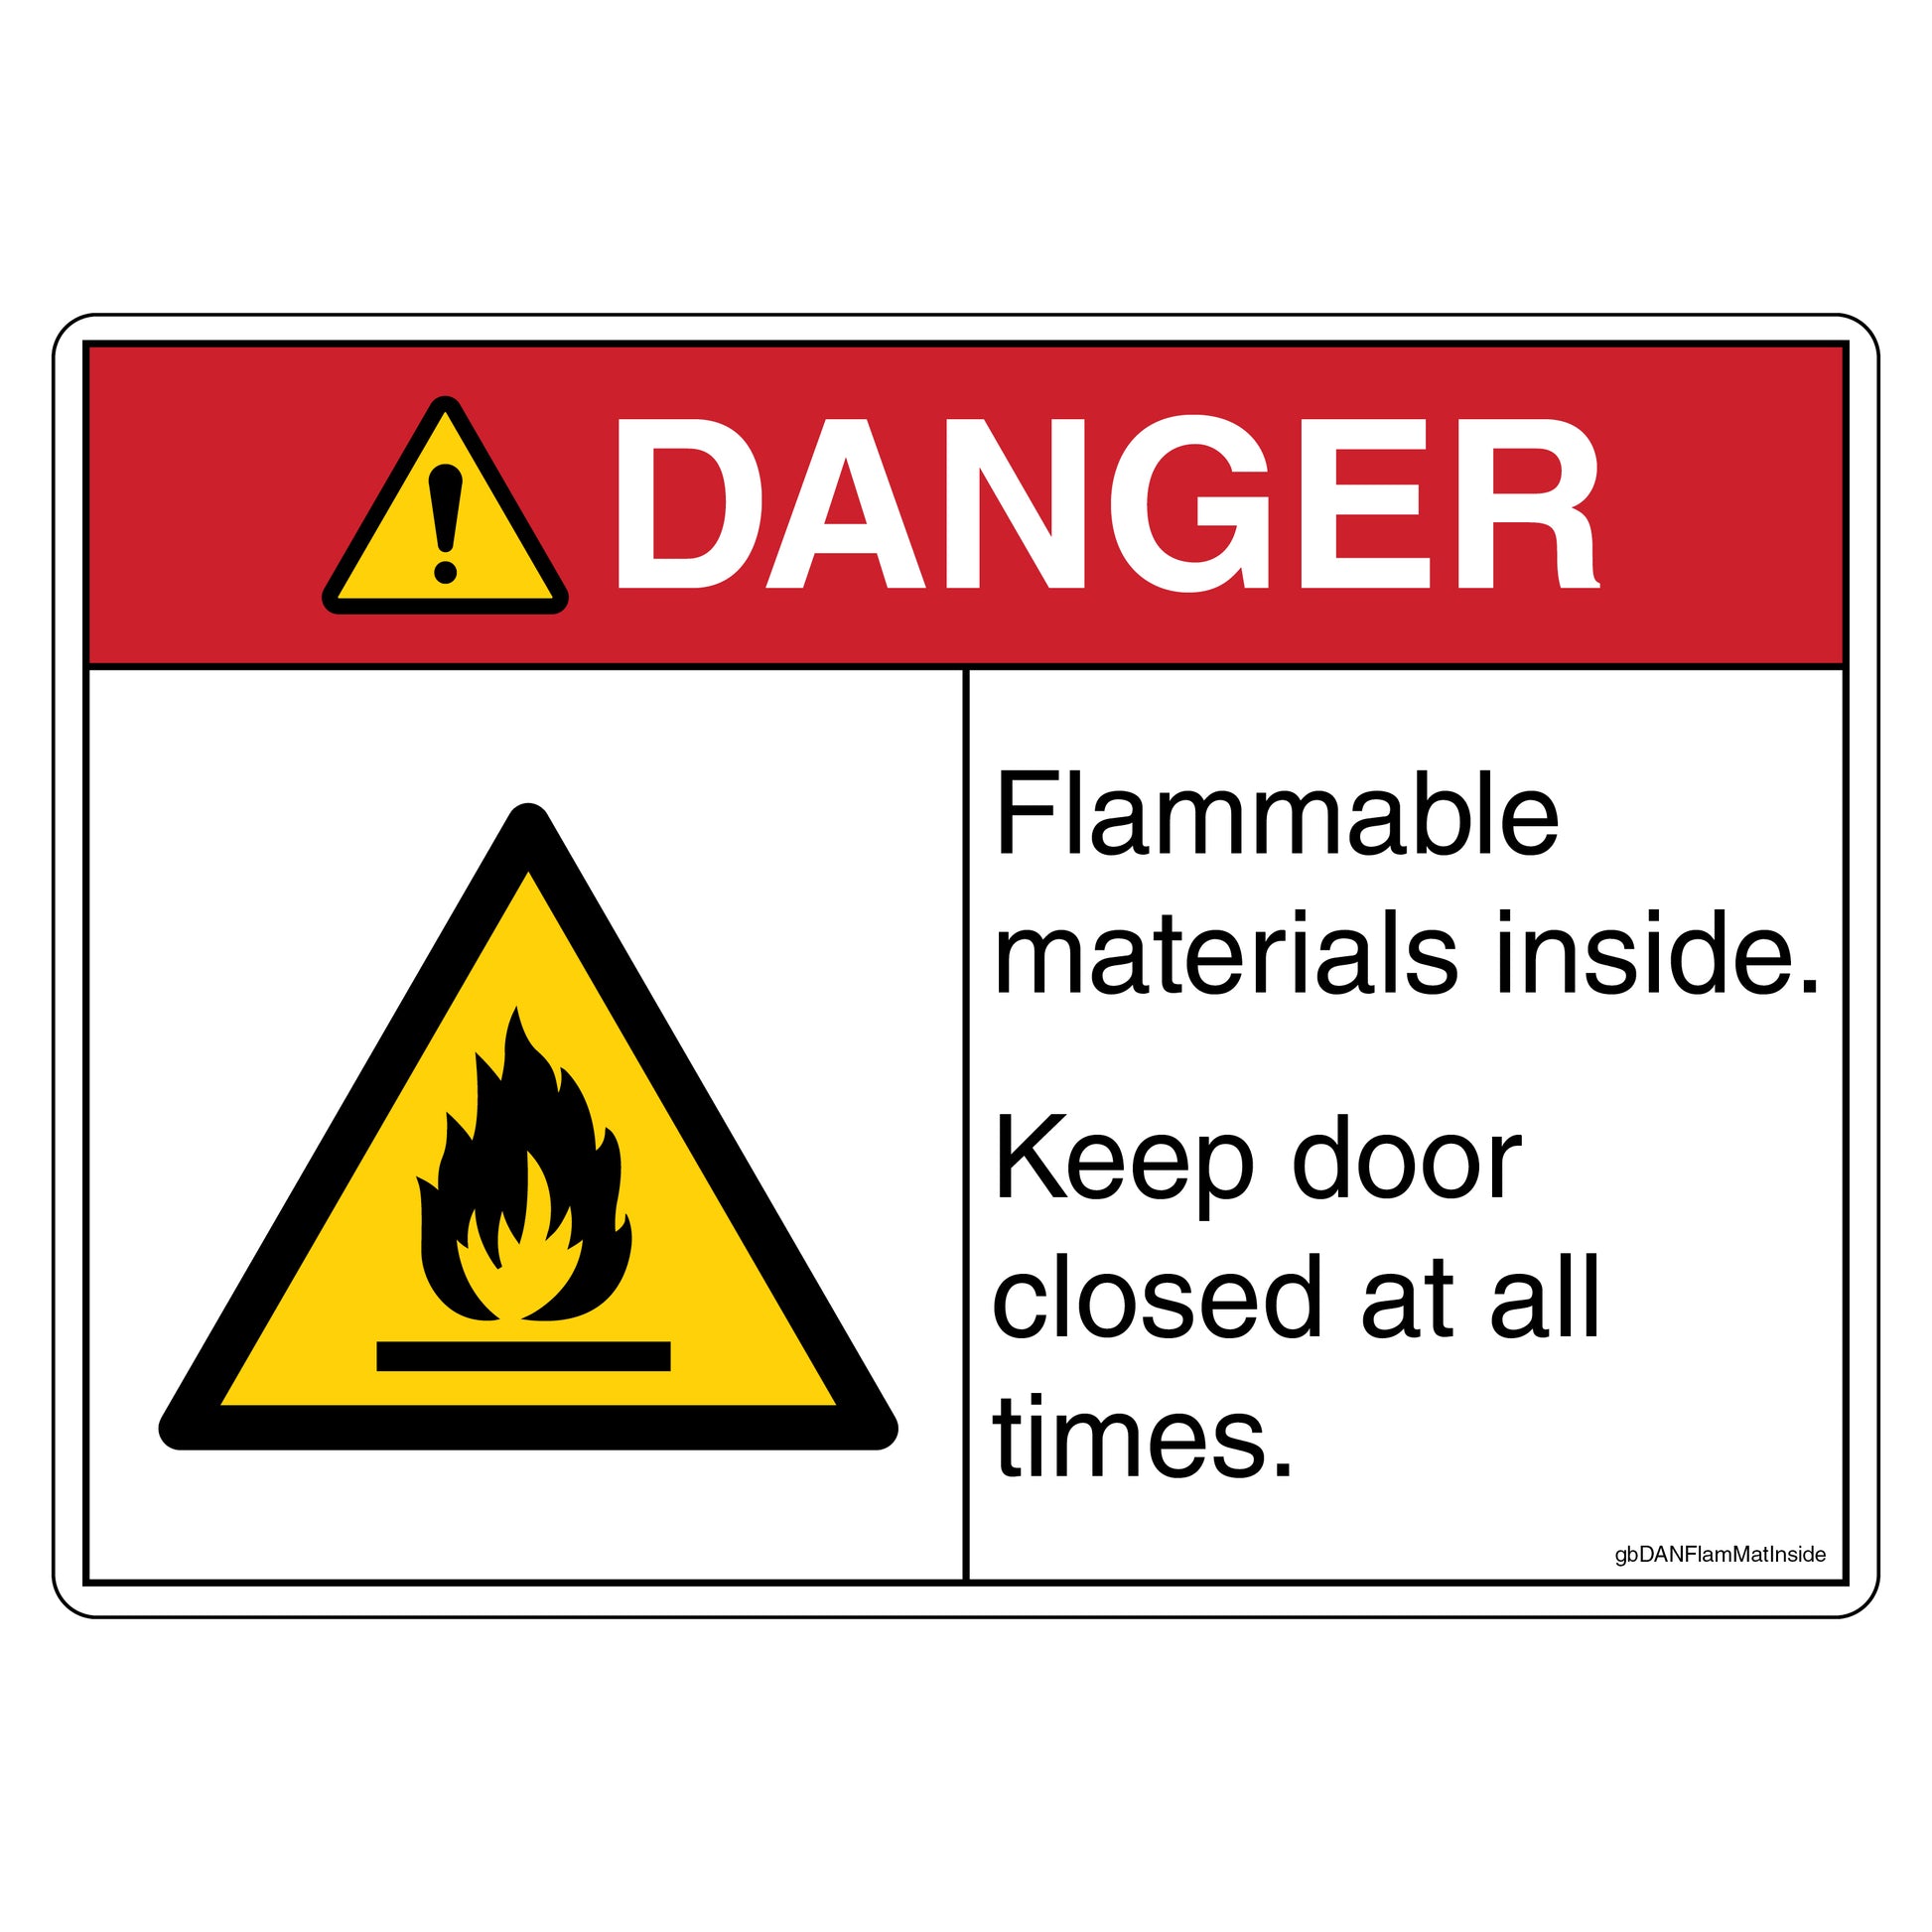 Danger Flammable Materials Inside Keep Door Closed at All Times Decal. 